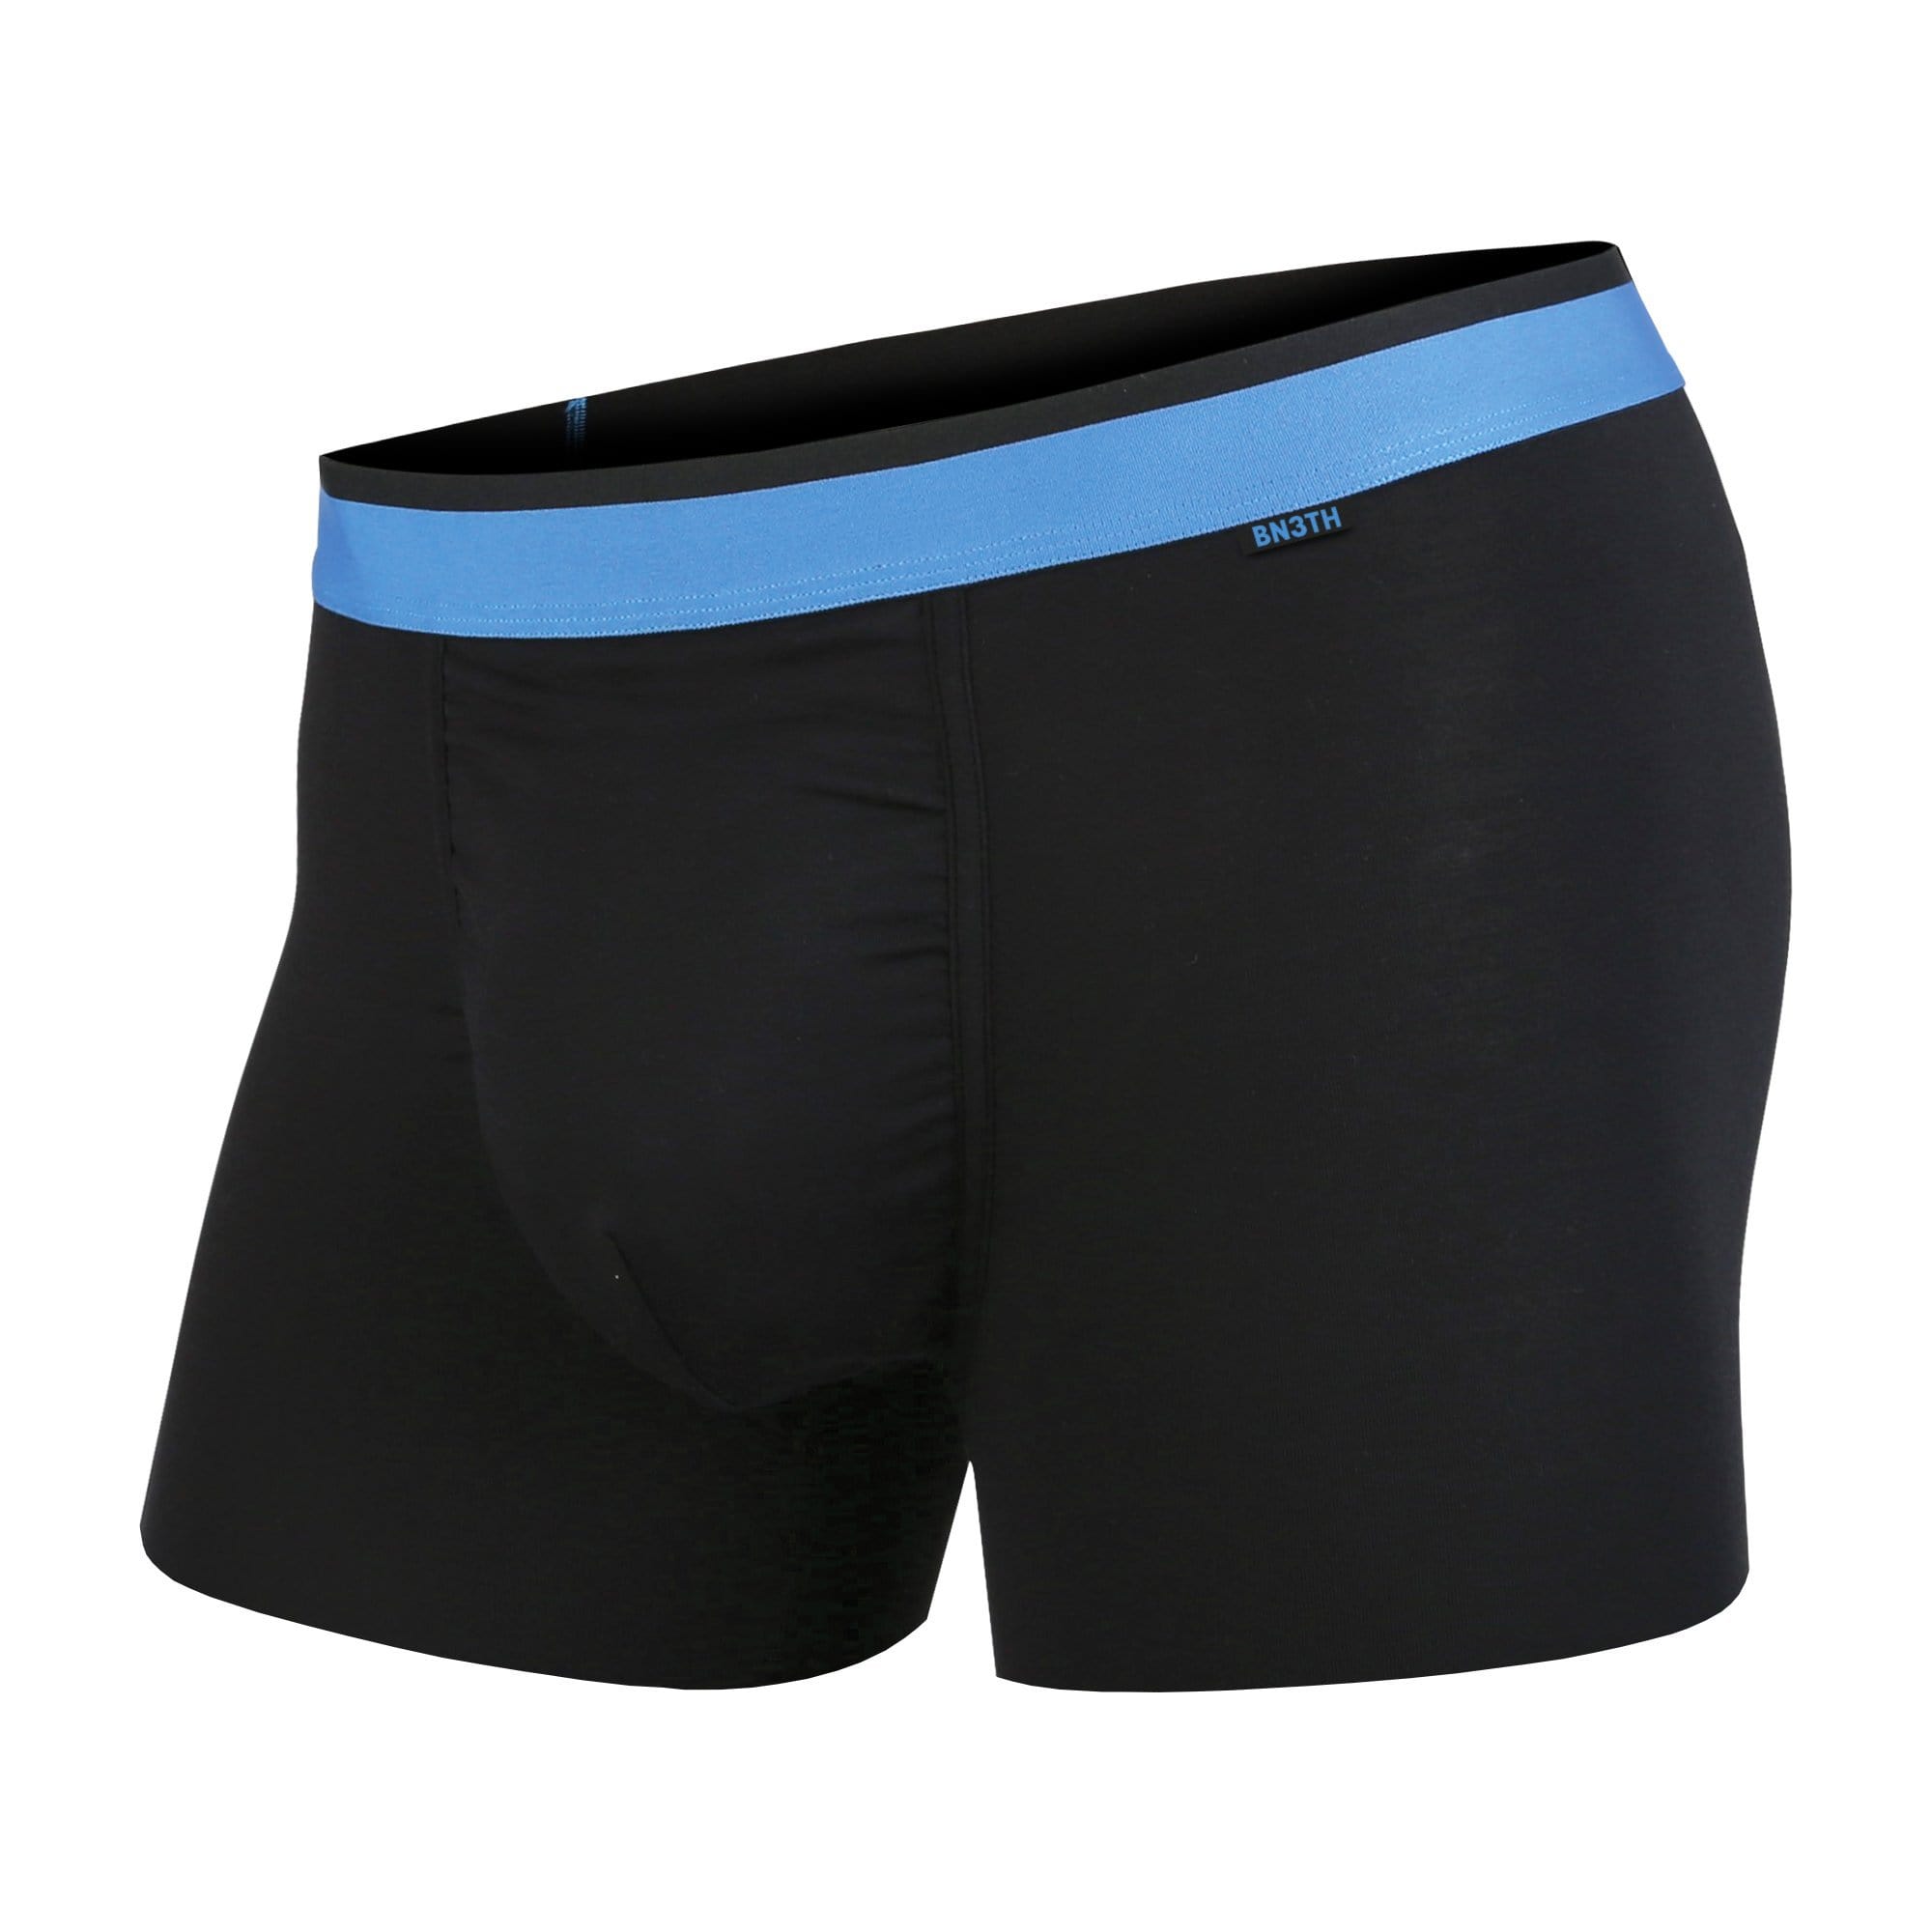 Men's Black/Blue Trunks / Hipsters | Ball Supporting | BN3TH – BN3TH.co.uk